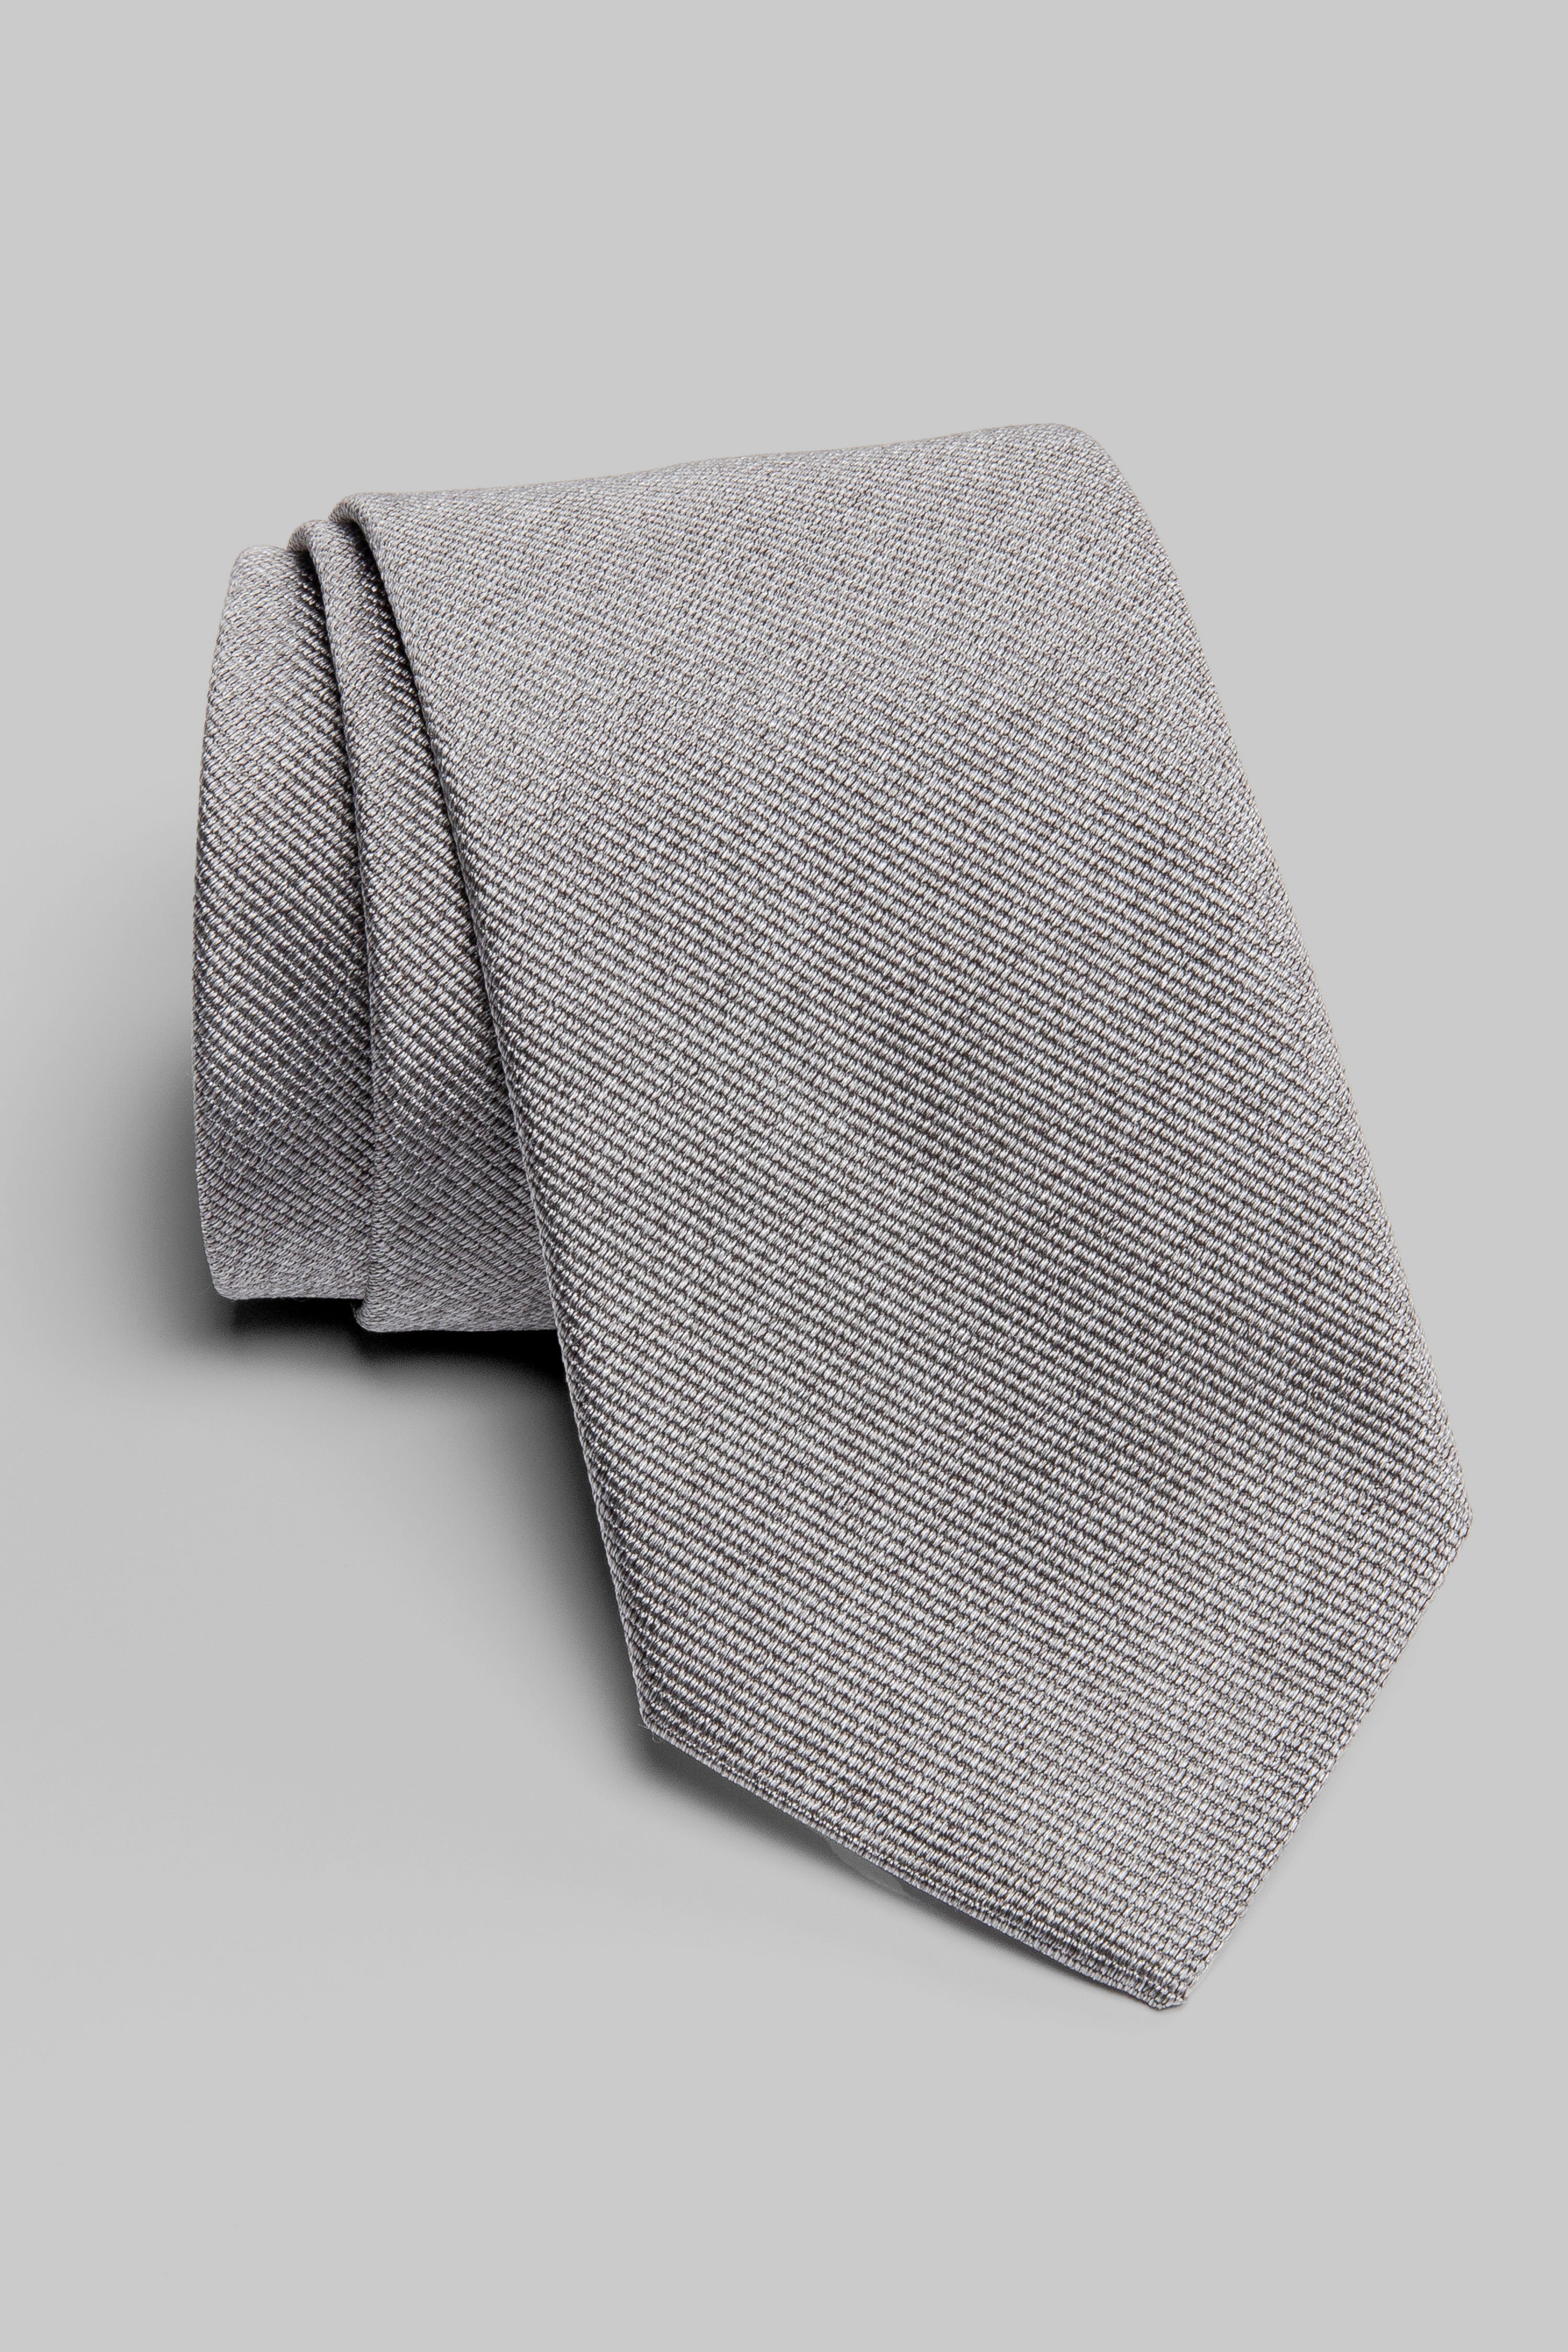 Alt view 1 Bowman Solid Woven Tie in Grey